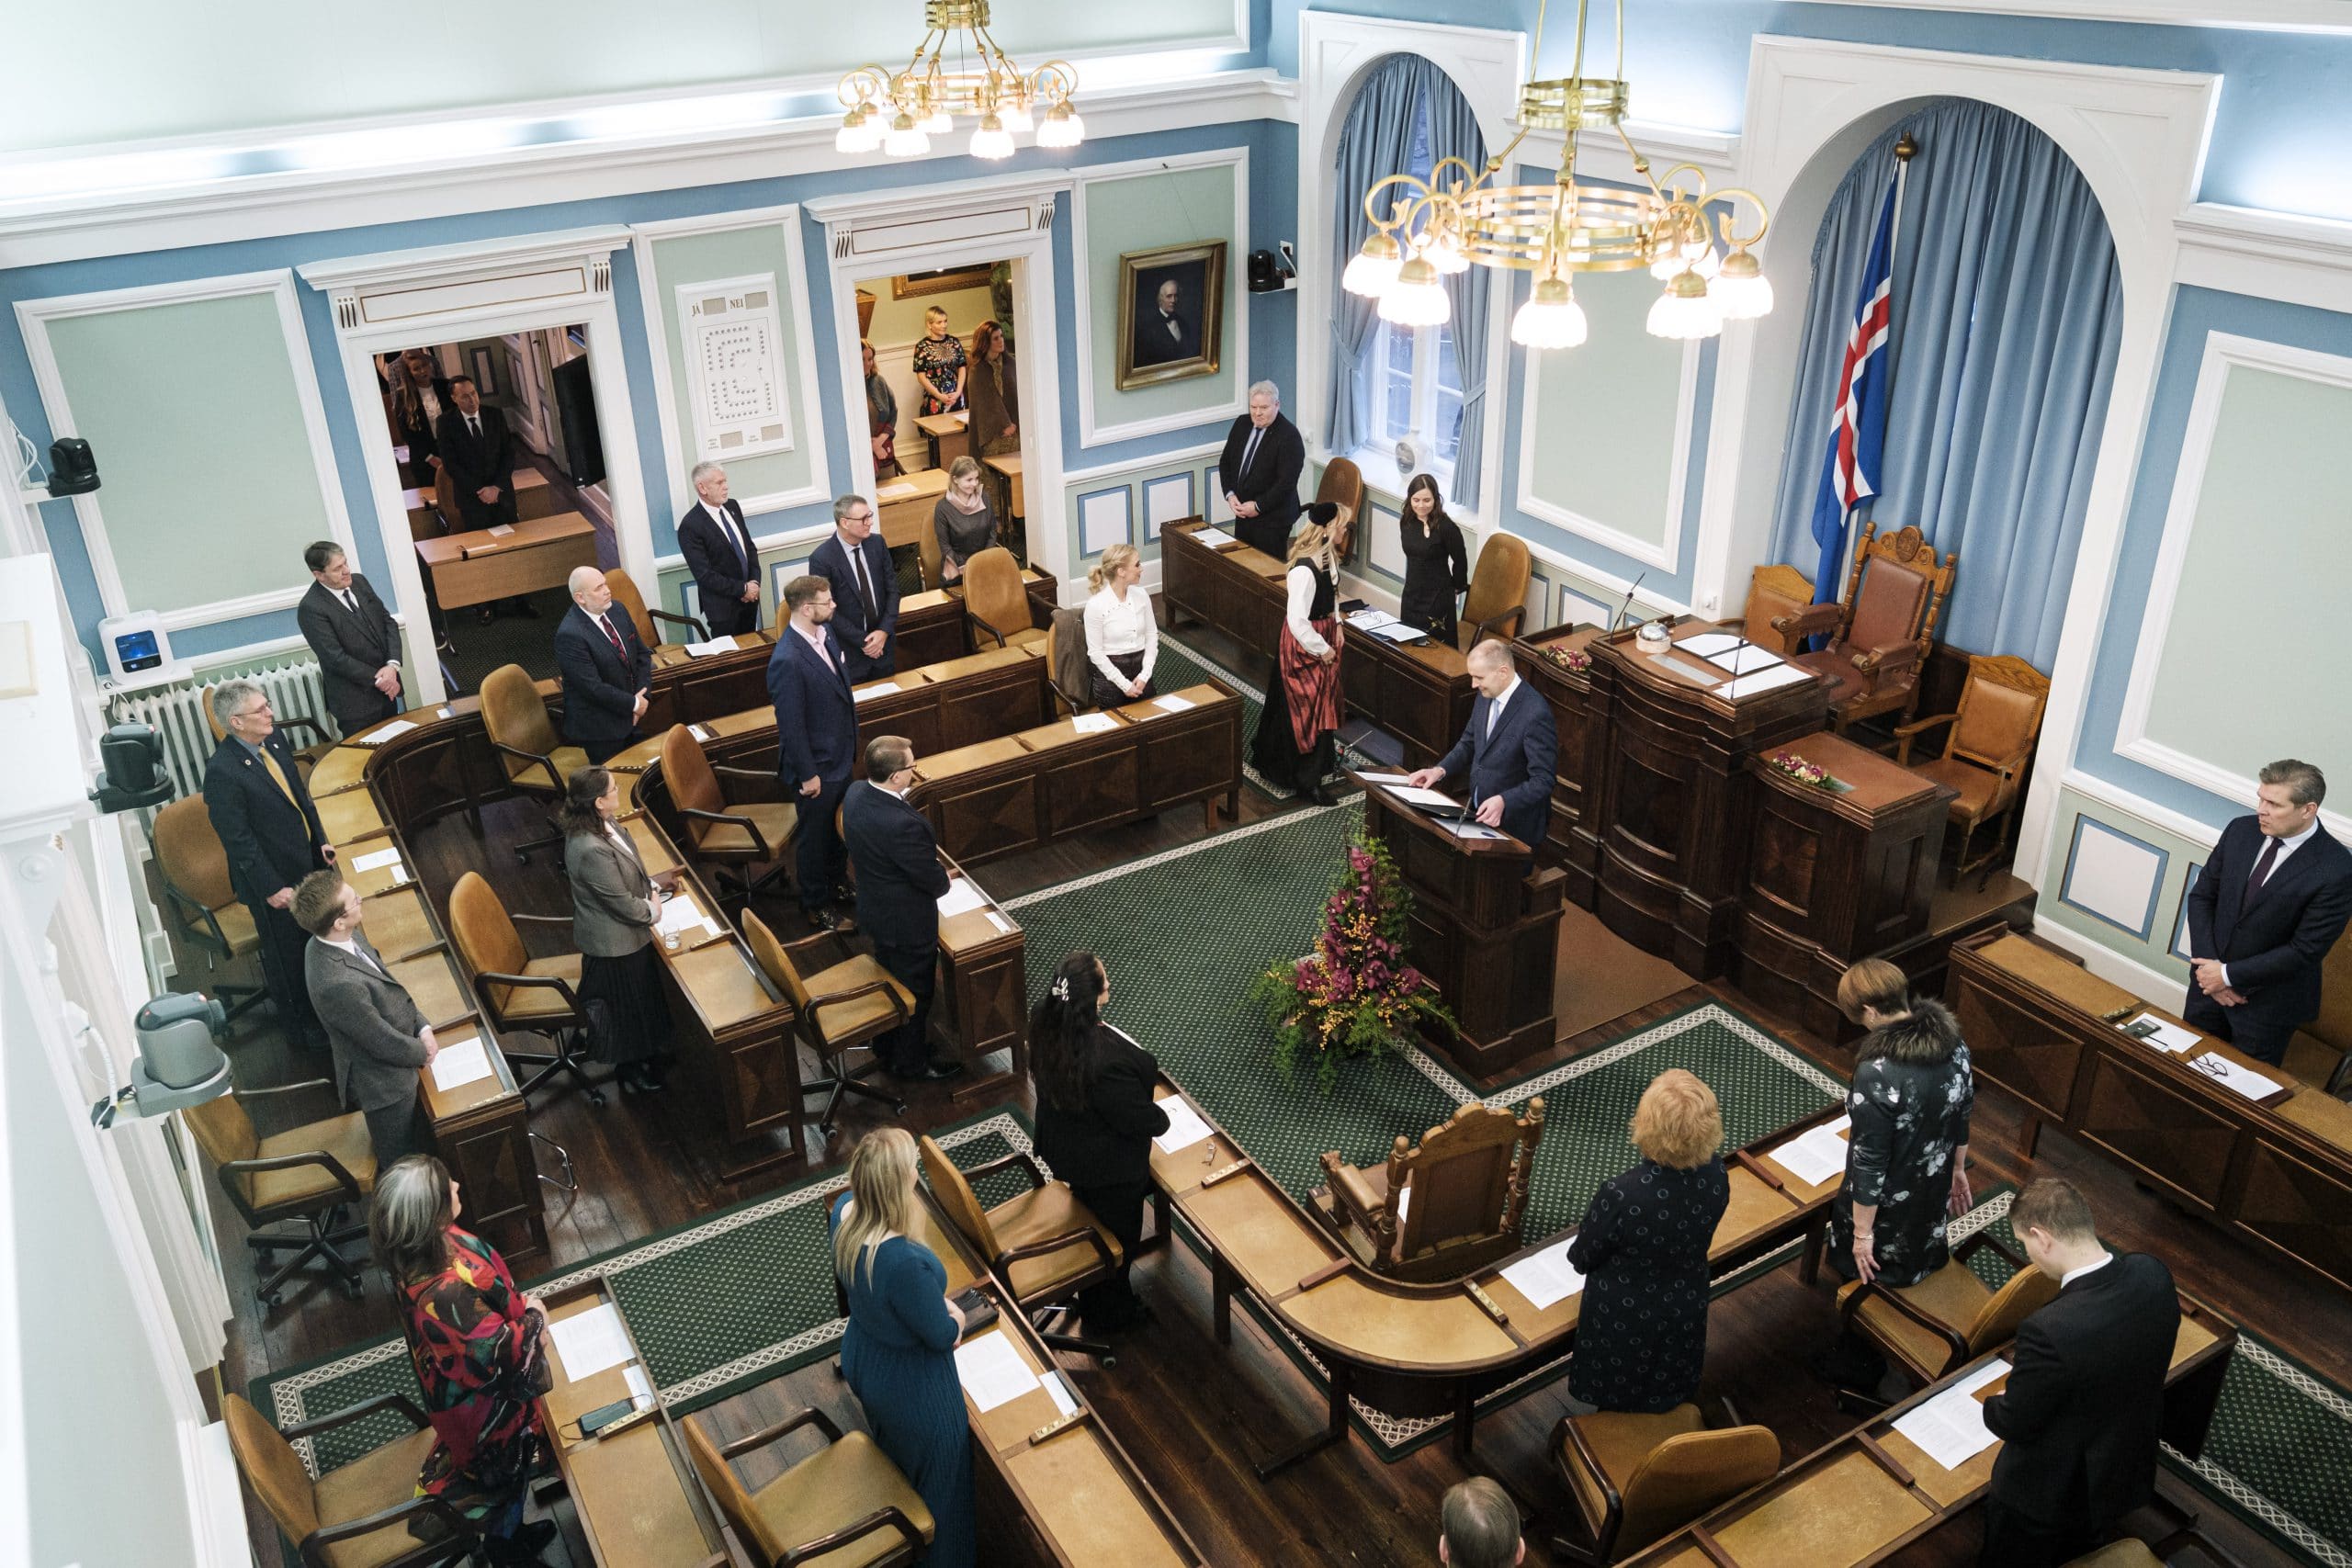 Opposition Abstains from Voting on “Míla Bill”